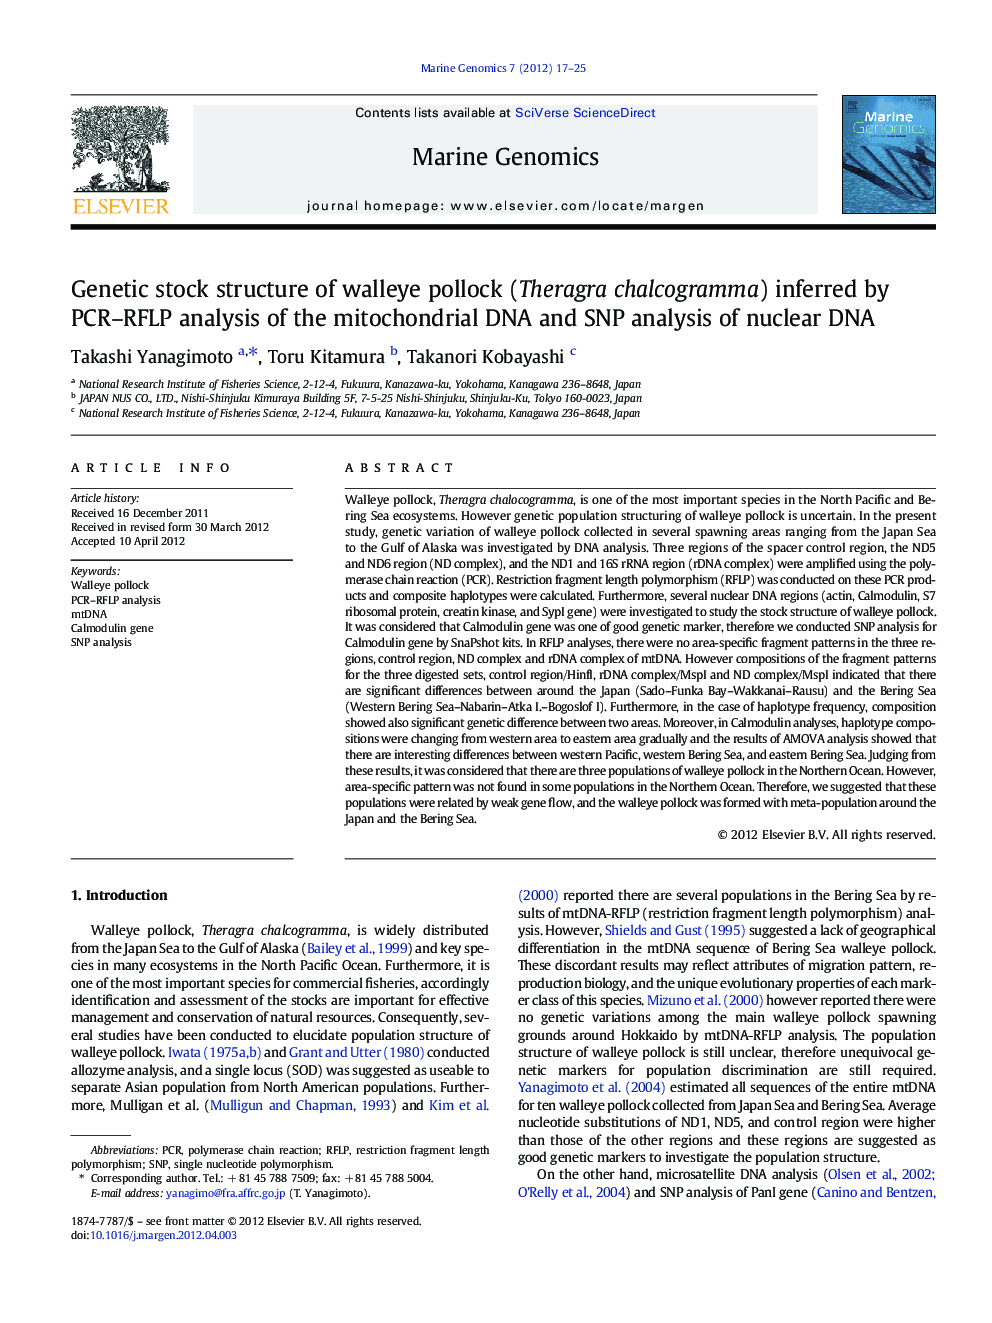 Genetic stock structure of walleye pollock (Theragra chalcogramma) inferred by PCR–RFLP analysis of the mitochondrial DNA and SNP analysis of nuclear DNA